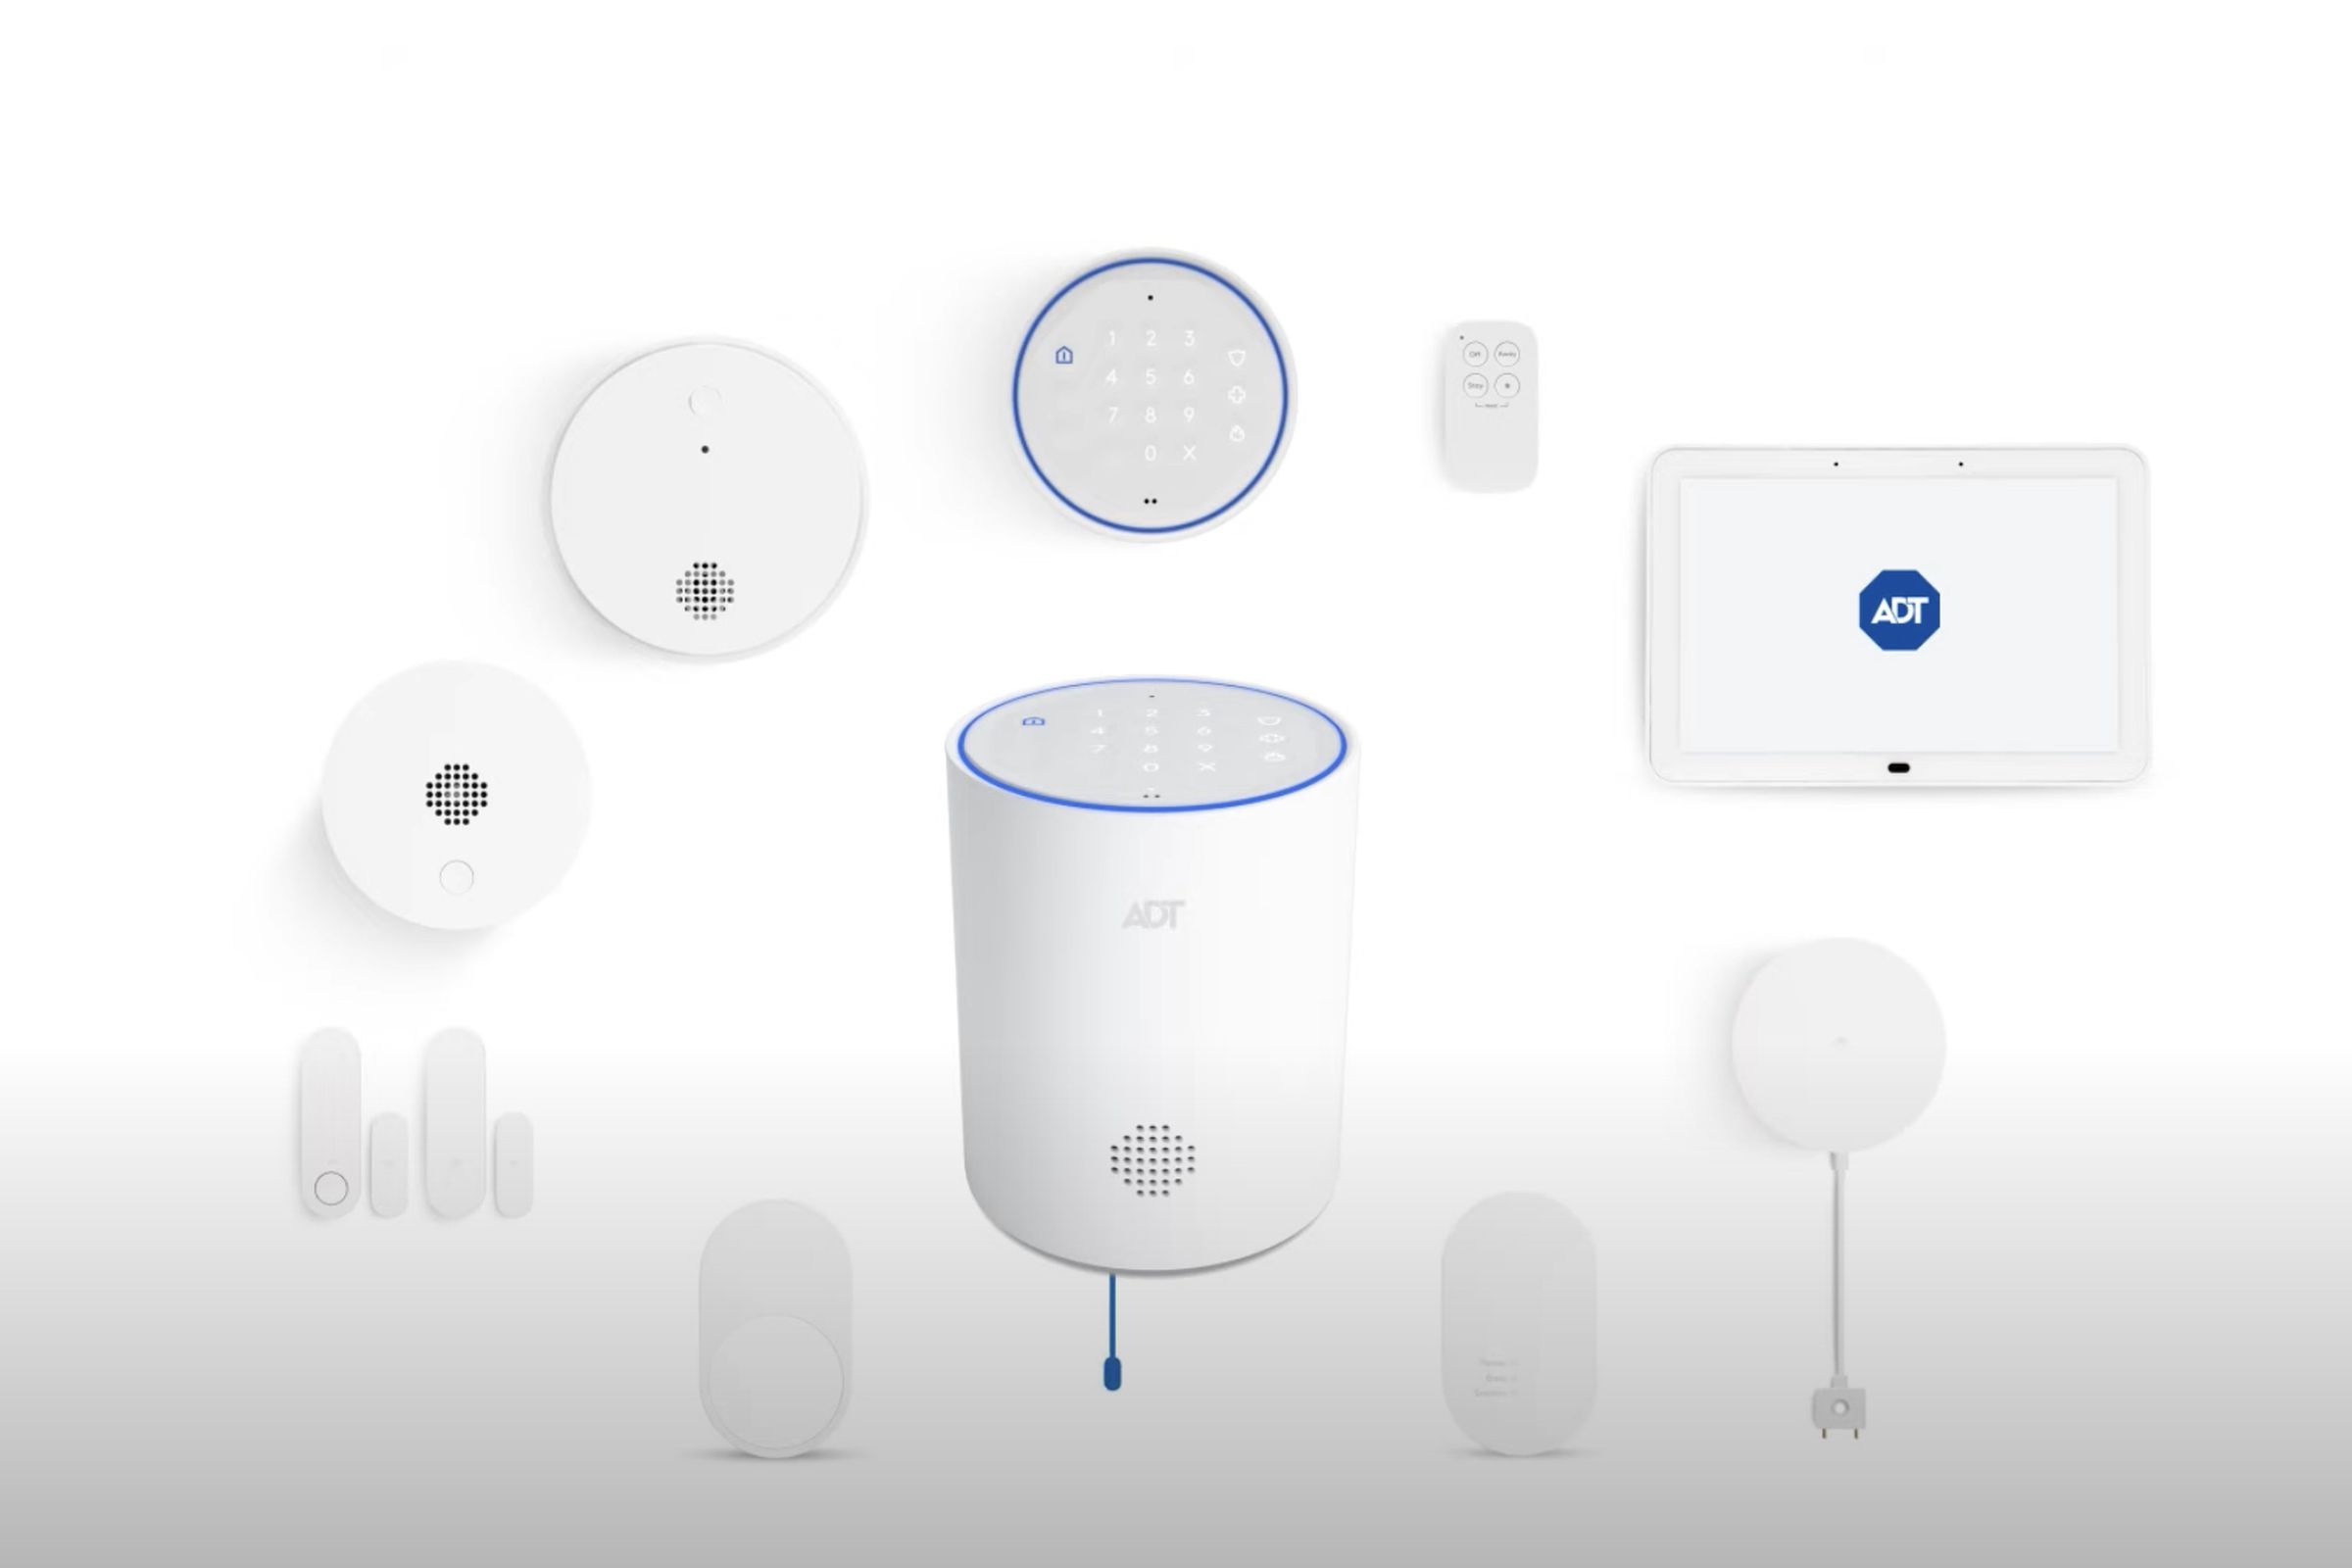 ADT has a new smart home security on the works that looks like it will launch next month.